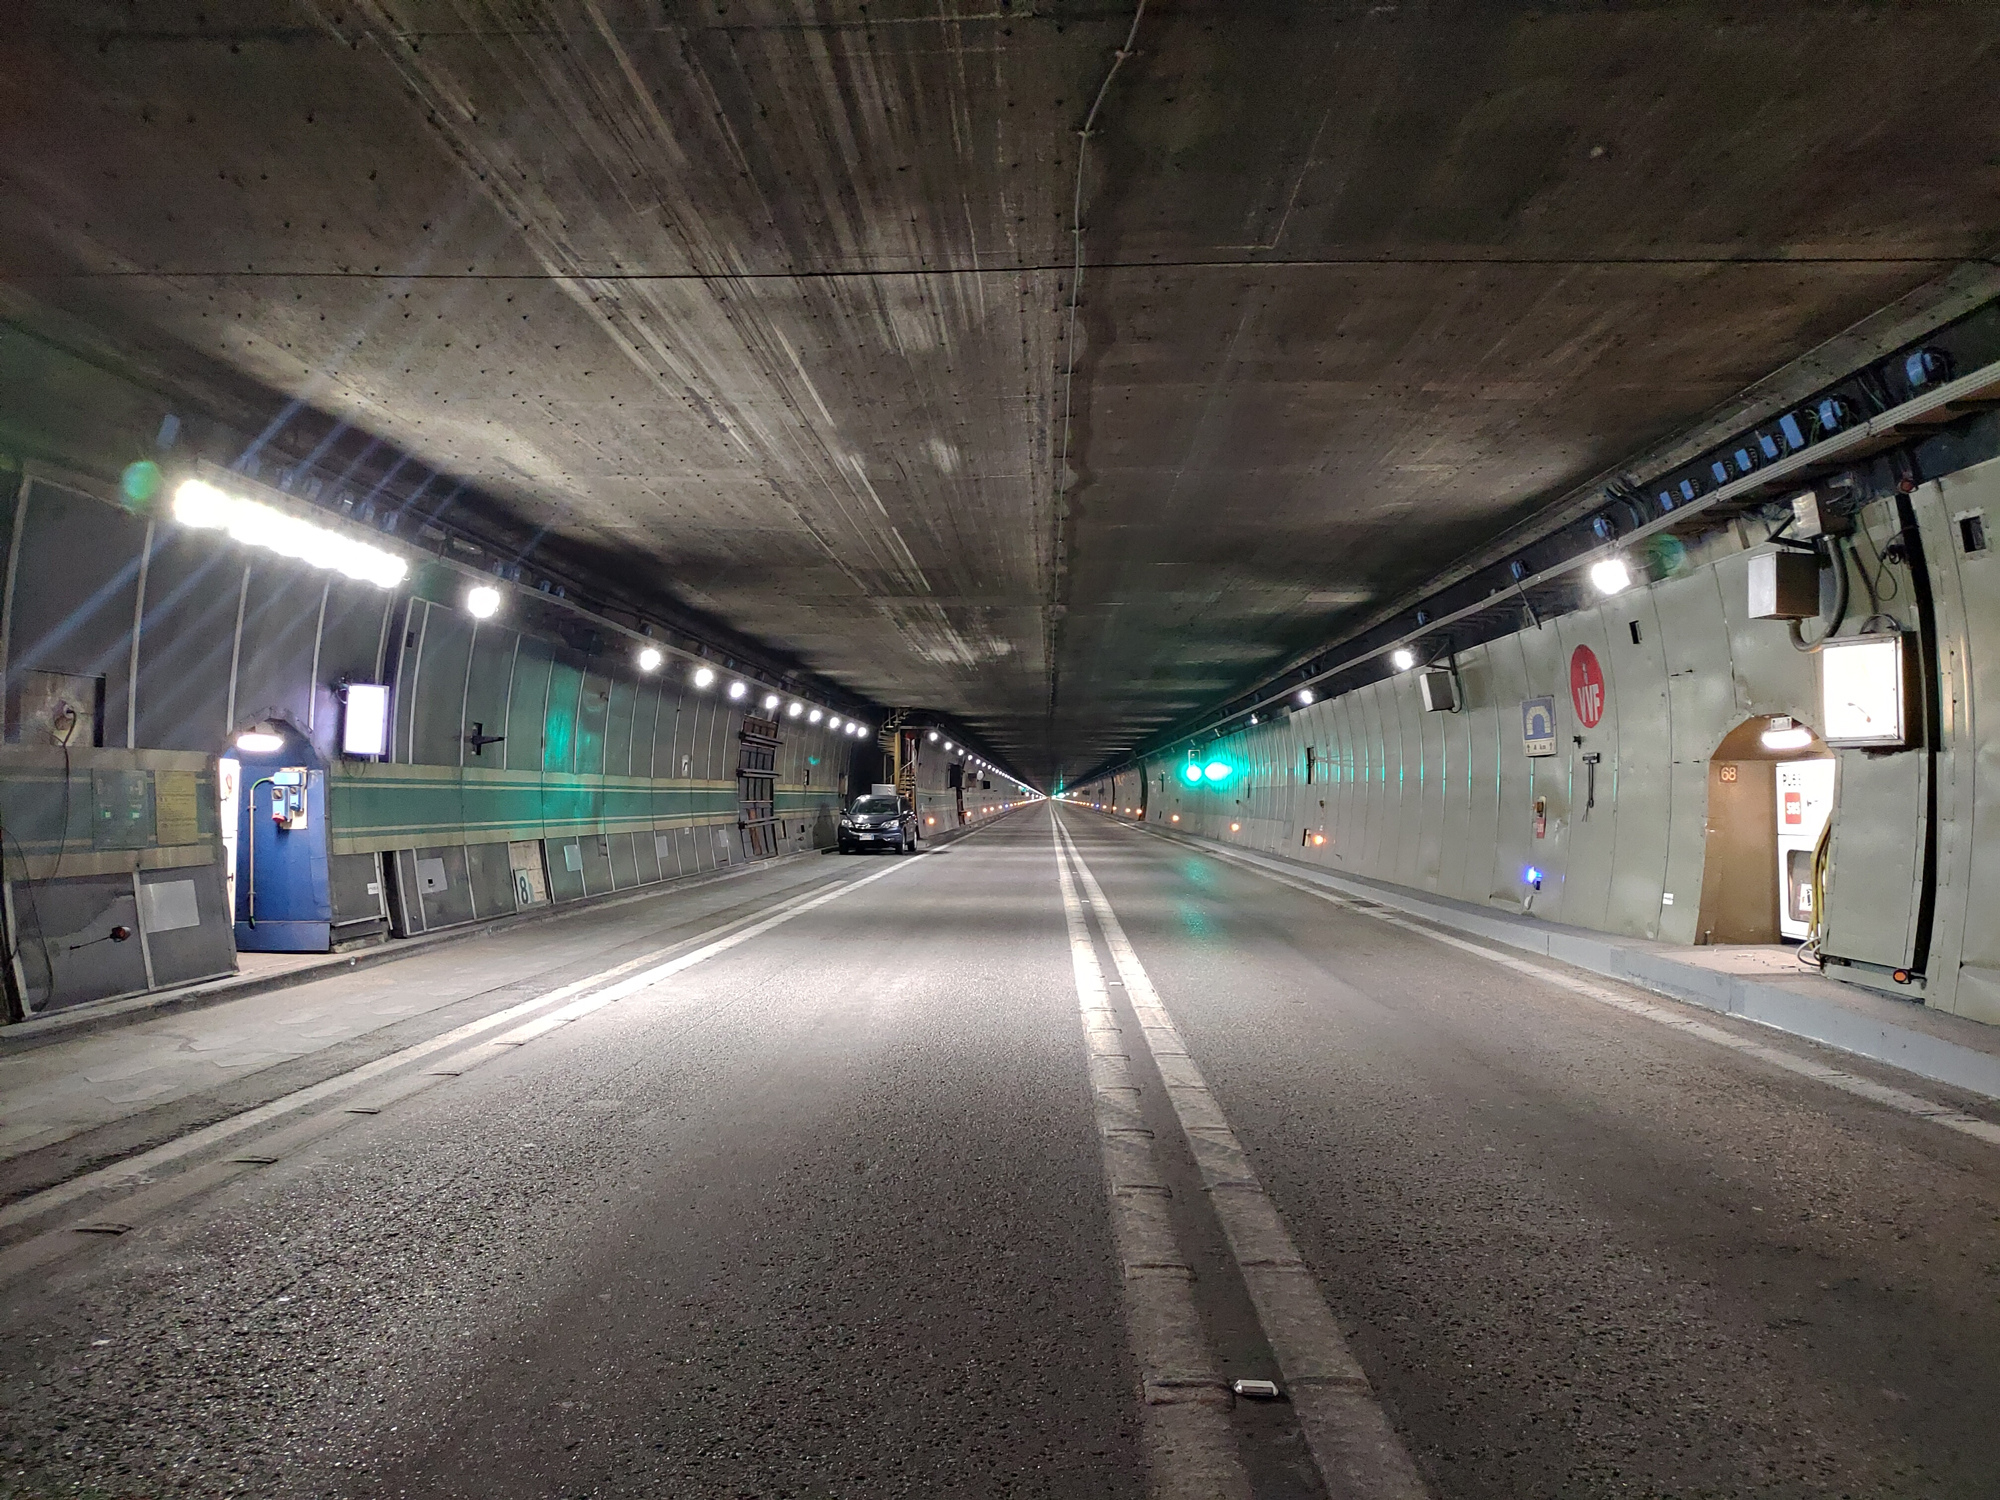 UNREINFORCED CAST-IN-PLACE HIGHWAY TUNNEL